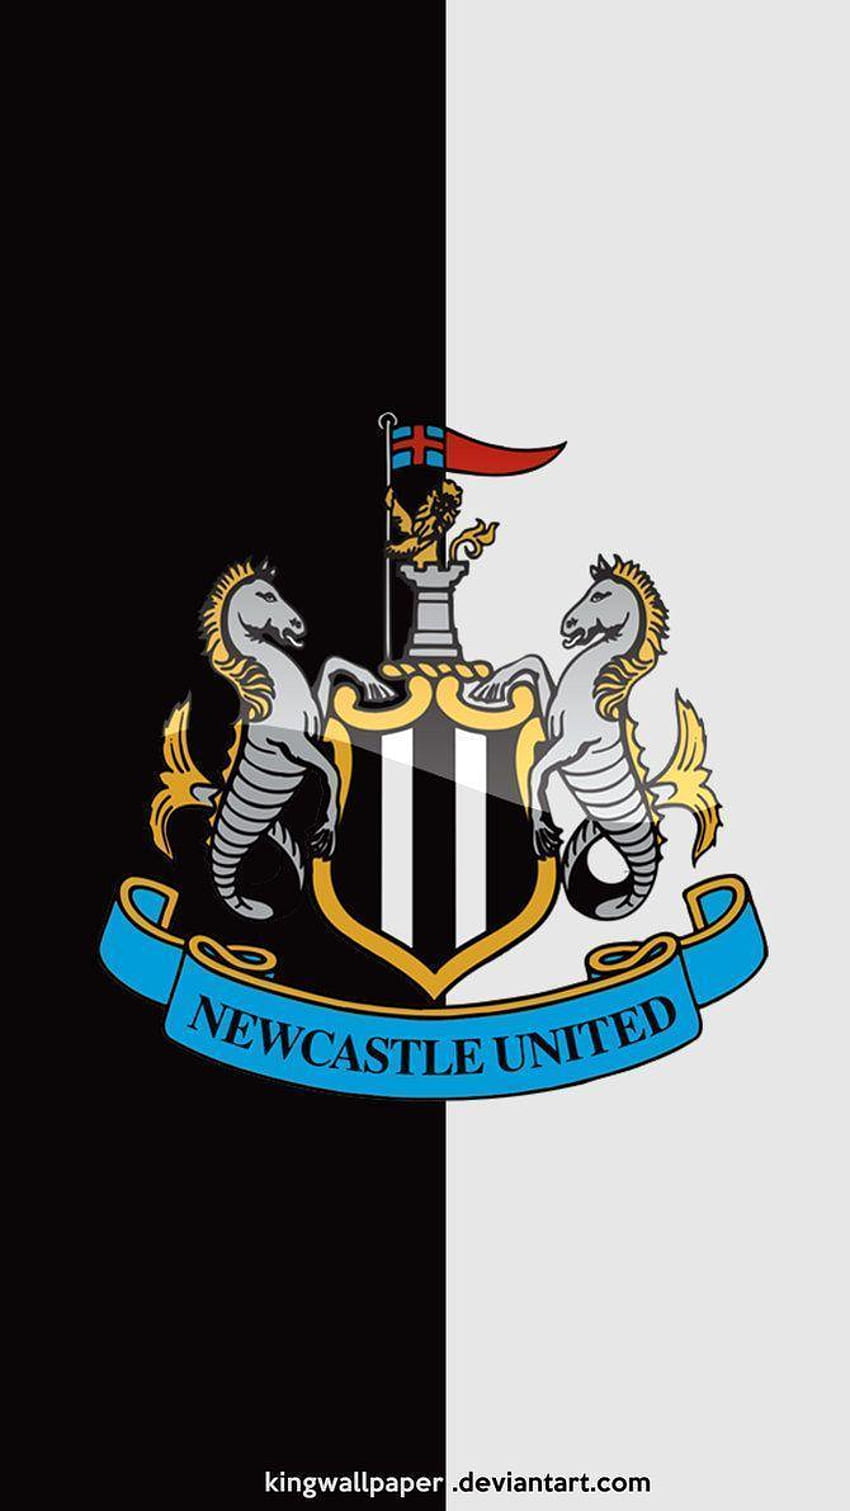 Nufc ,,Newcastle United wallpaper ponsel HD